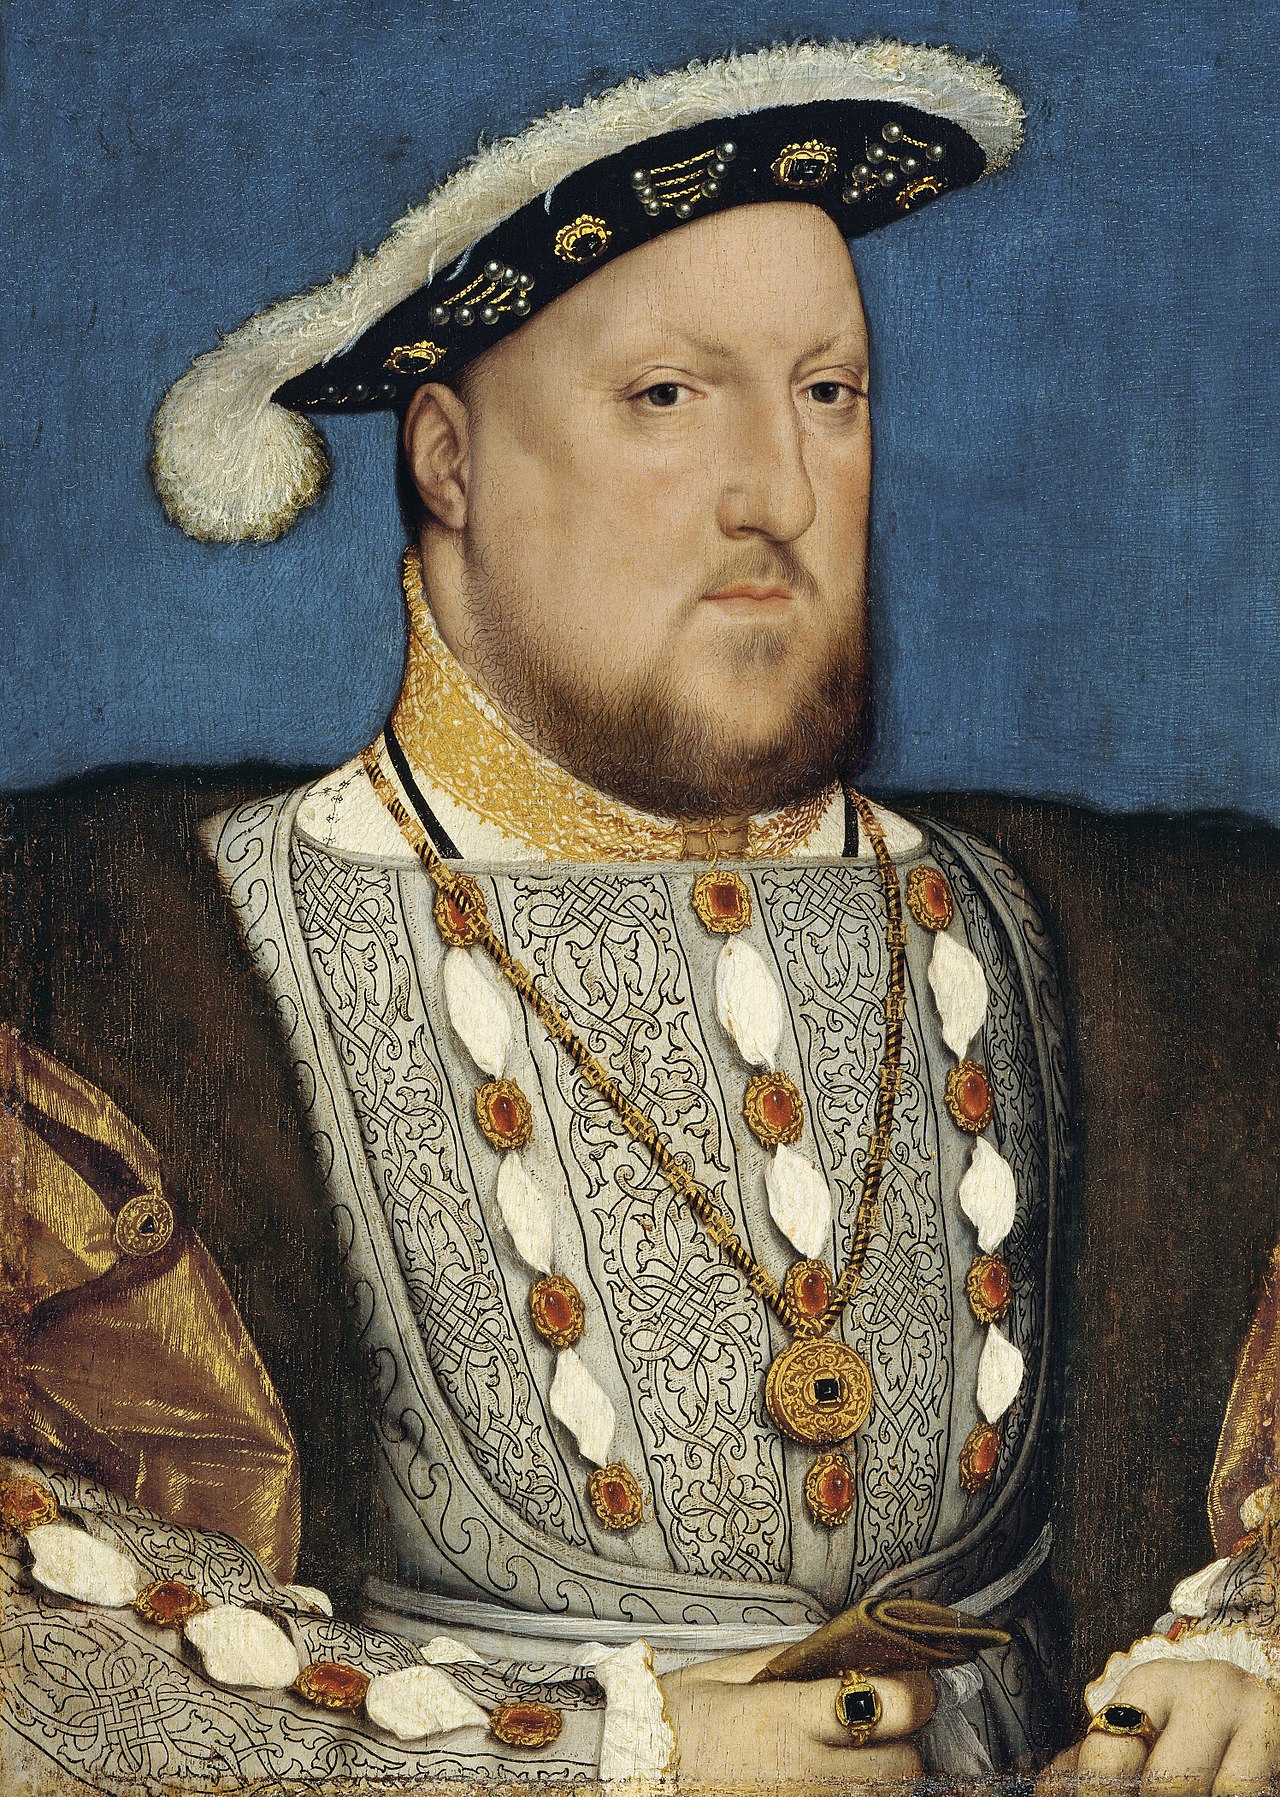 Painting of large bearded man with fur trimmed cloak, wearing a hat.